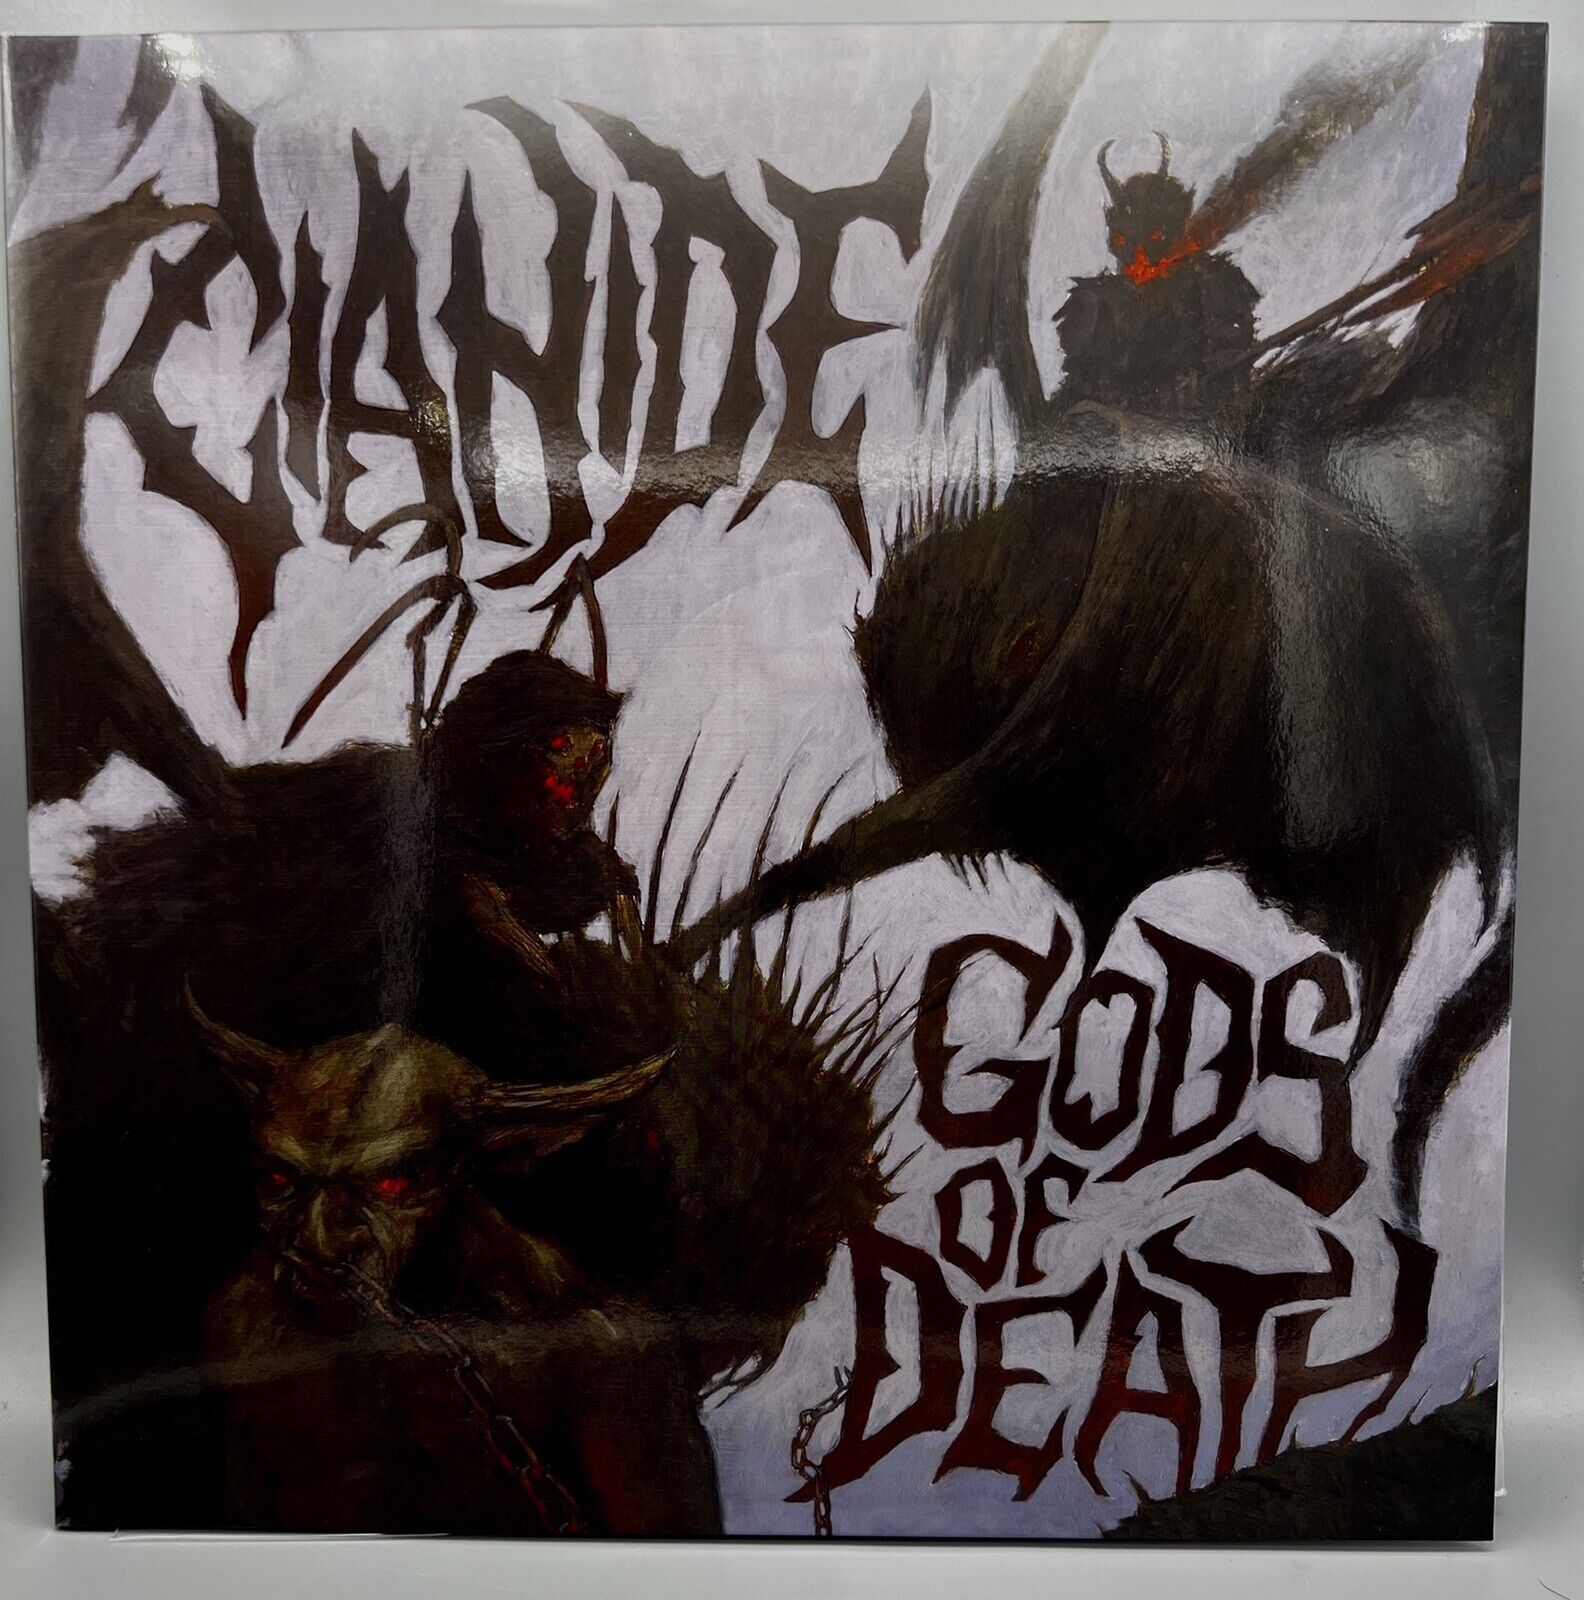 Cianide – Gods Of Death (2011 Vinyl Record) Death Metal LE Picture Disk 